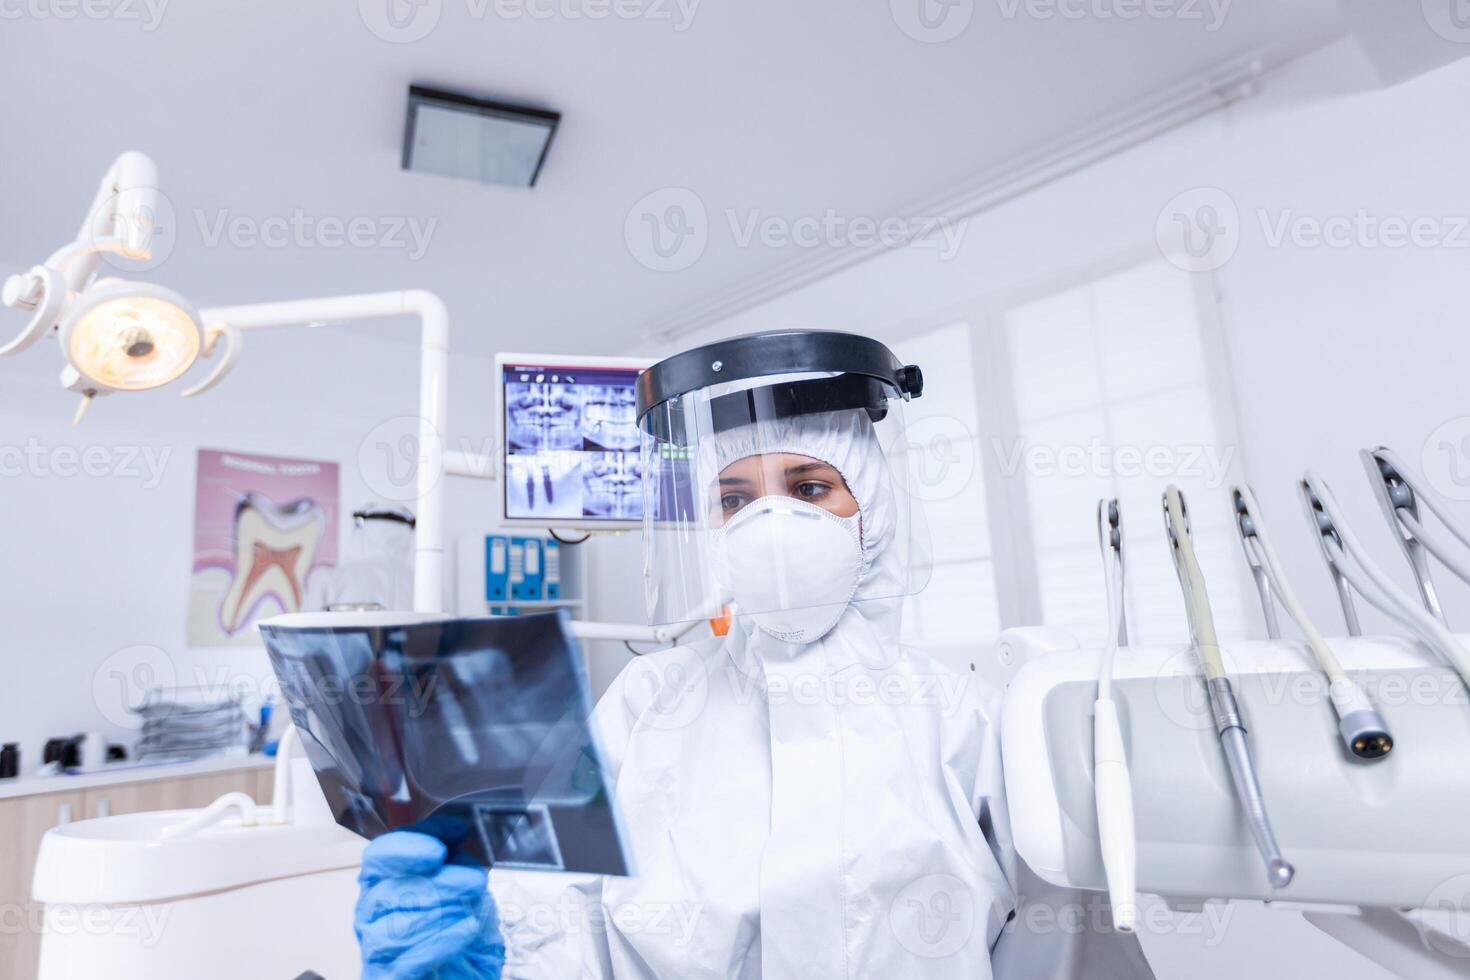 Patient pov in dental office looking at dentist holding radiography dressed in protective gear during covid-19. Dental specialist wearing protective hazmat suit against coroanvirus showing radiography. photo